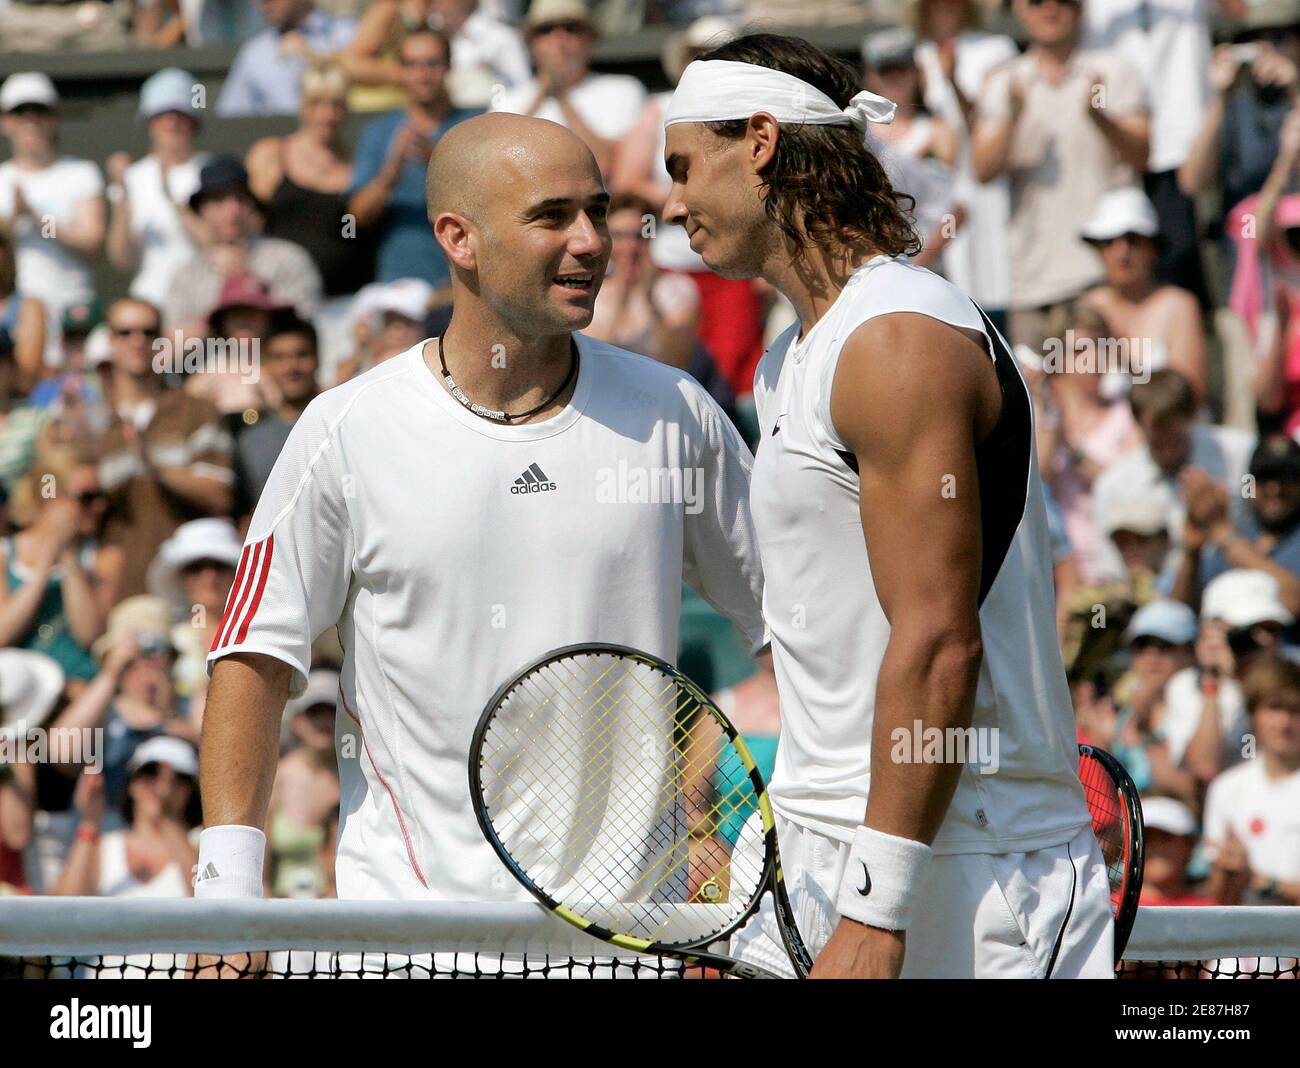 Andre Agassi of the U.S. (L) talks with Spain's Rafael Nadal after being  defeated during their match at the Wimbledon tennis championships in London  July 1, 2006, which was Agassi's last Wimbledon